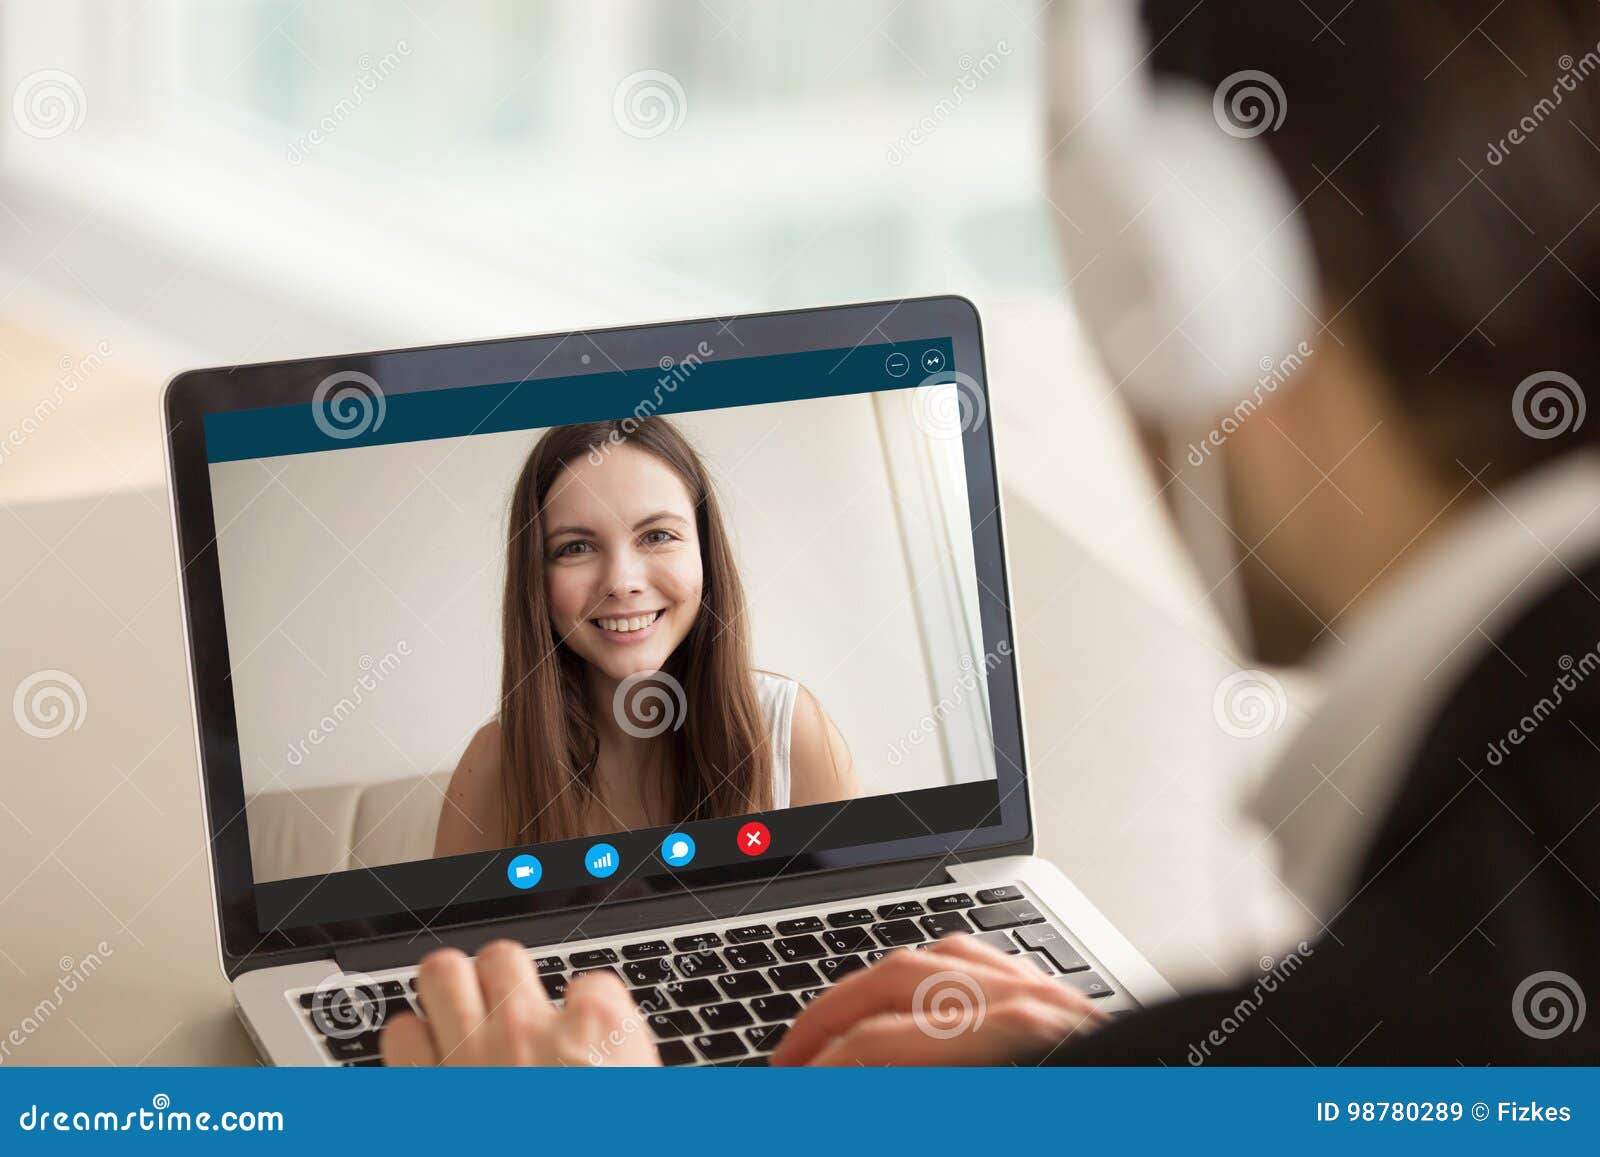 Video chat with online girls onCamChat